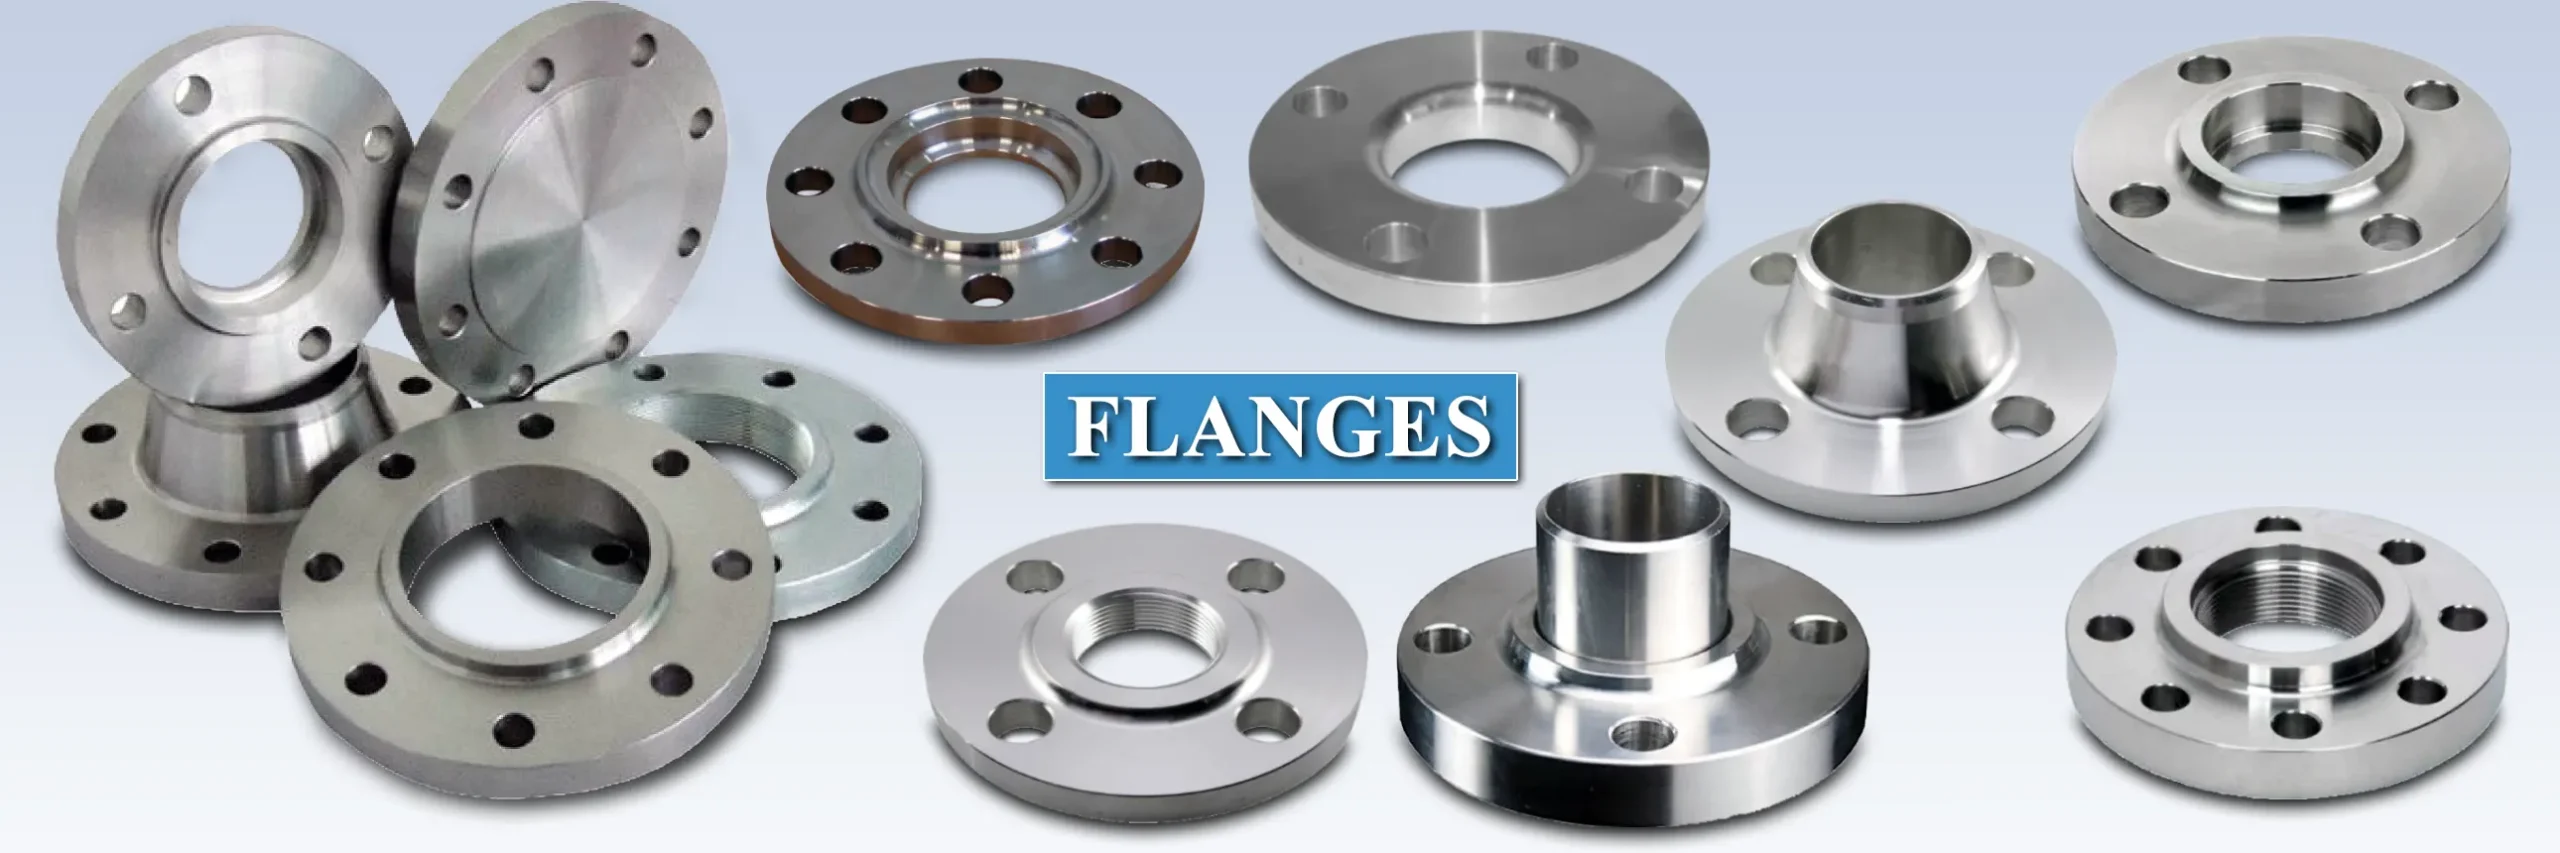 FLANGES NEWW